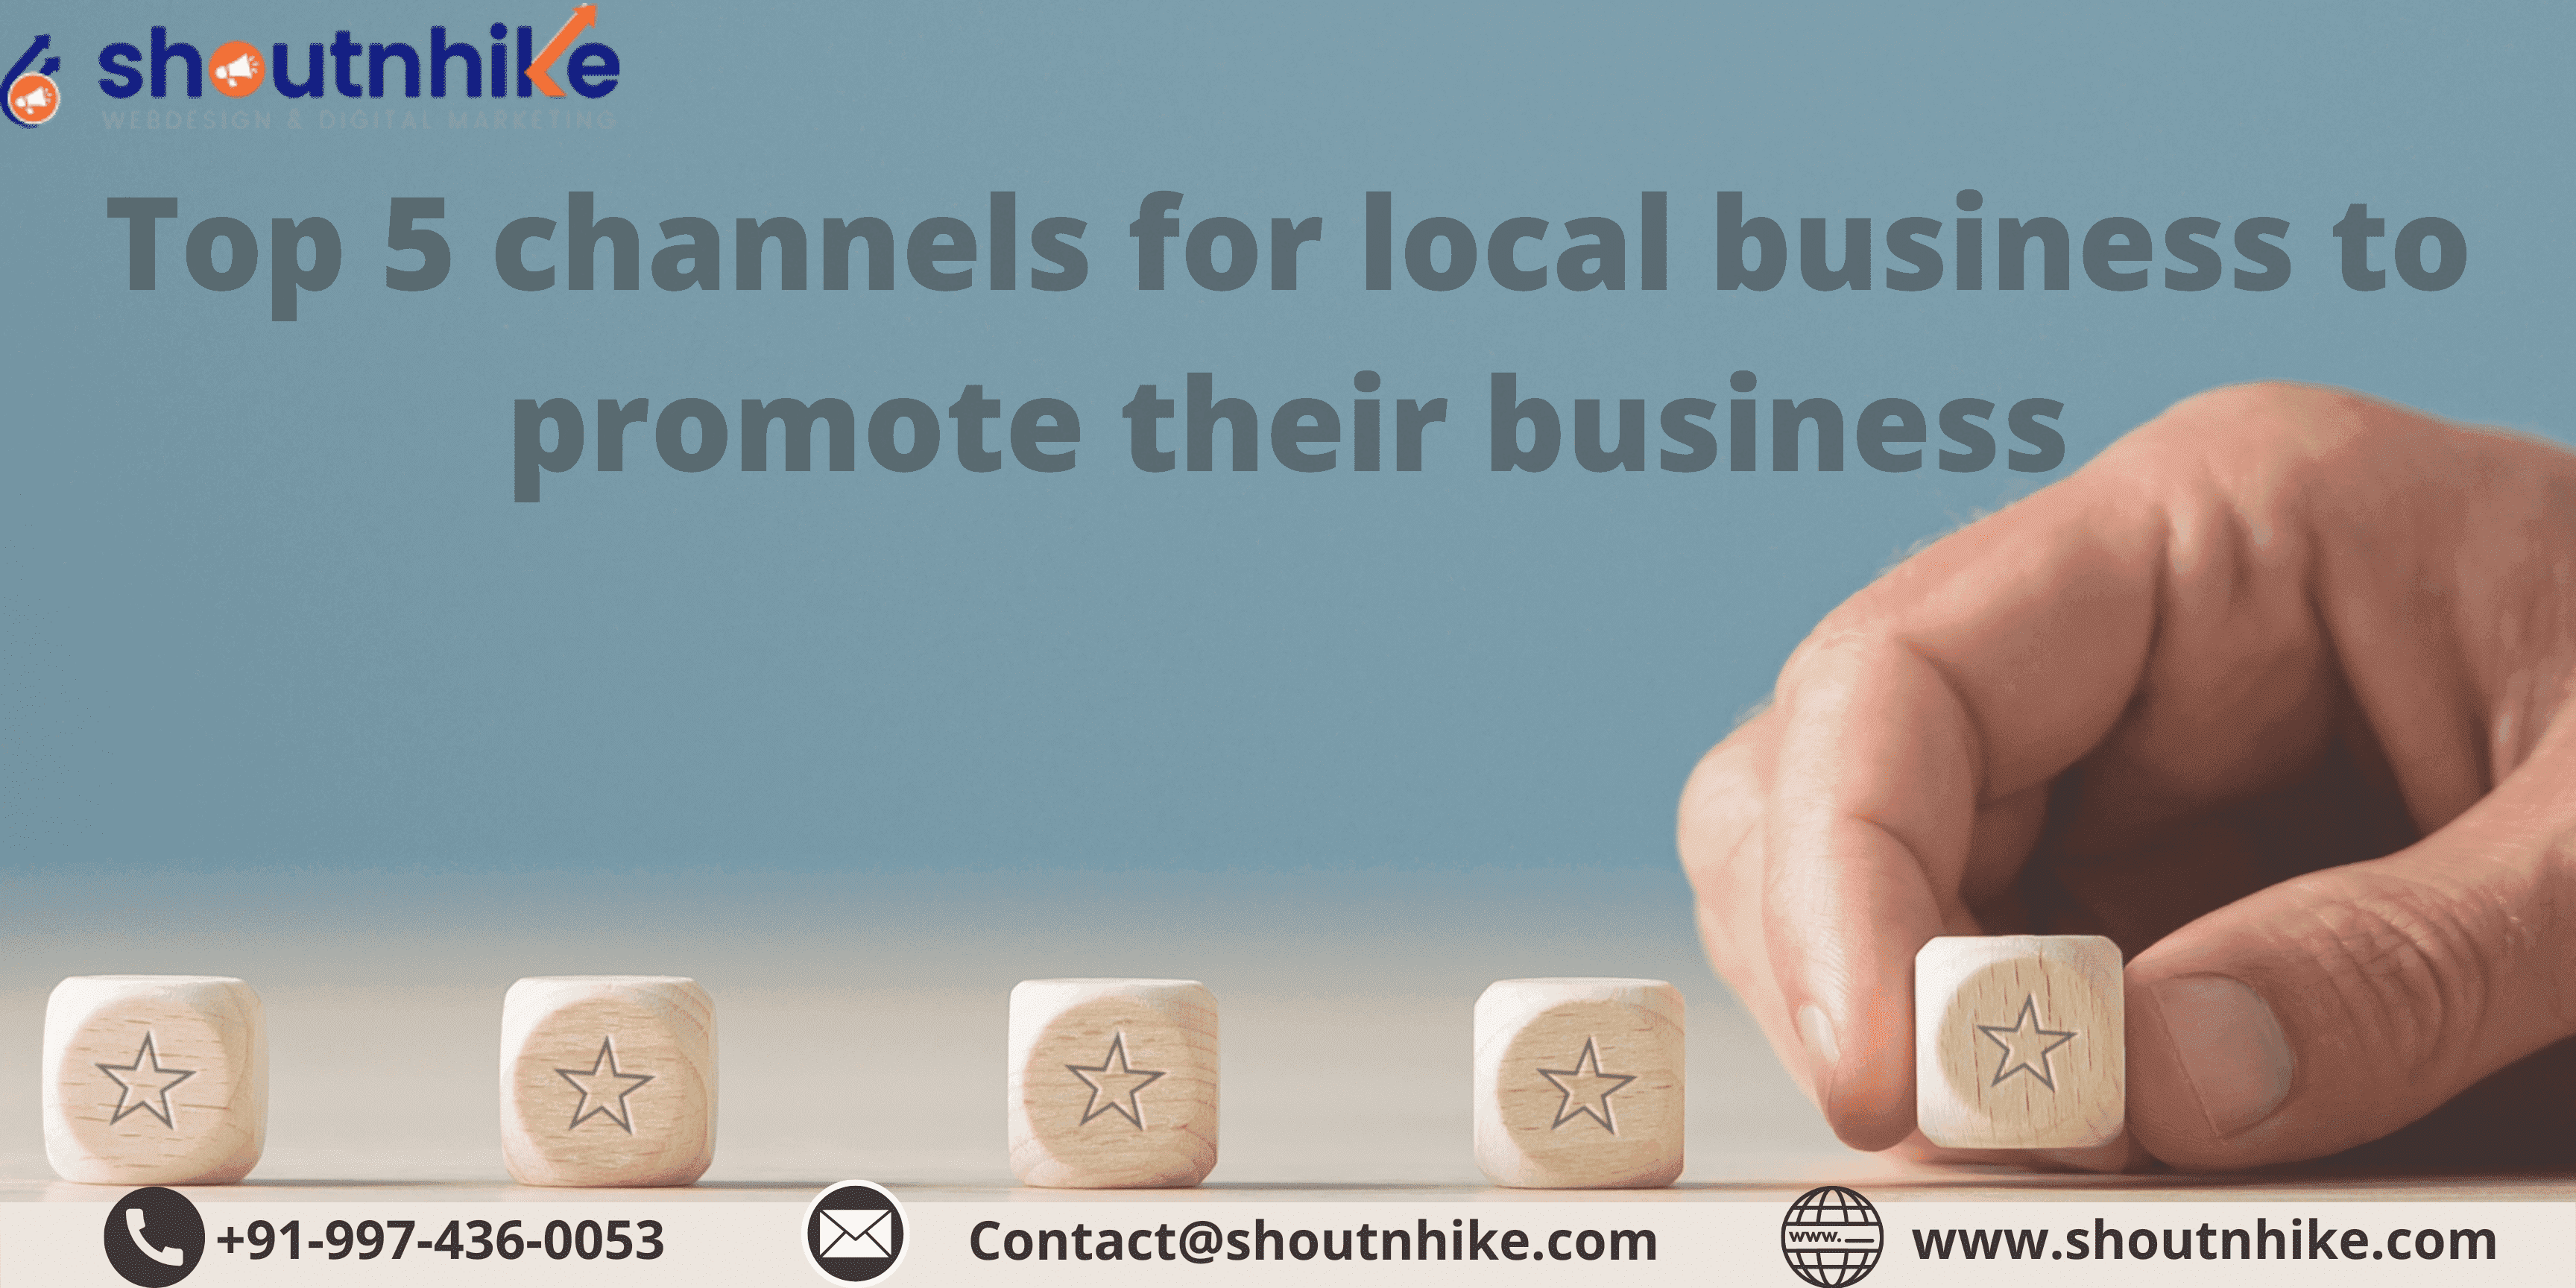 Top 5 channels for local business to promote their business